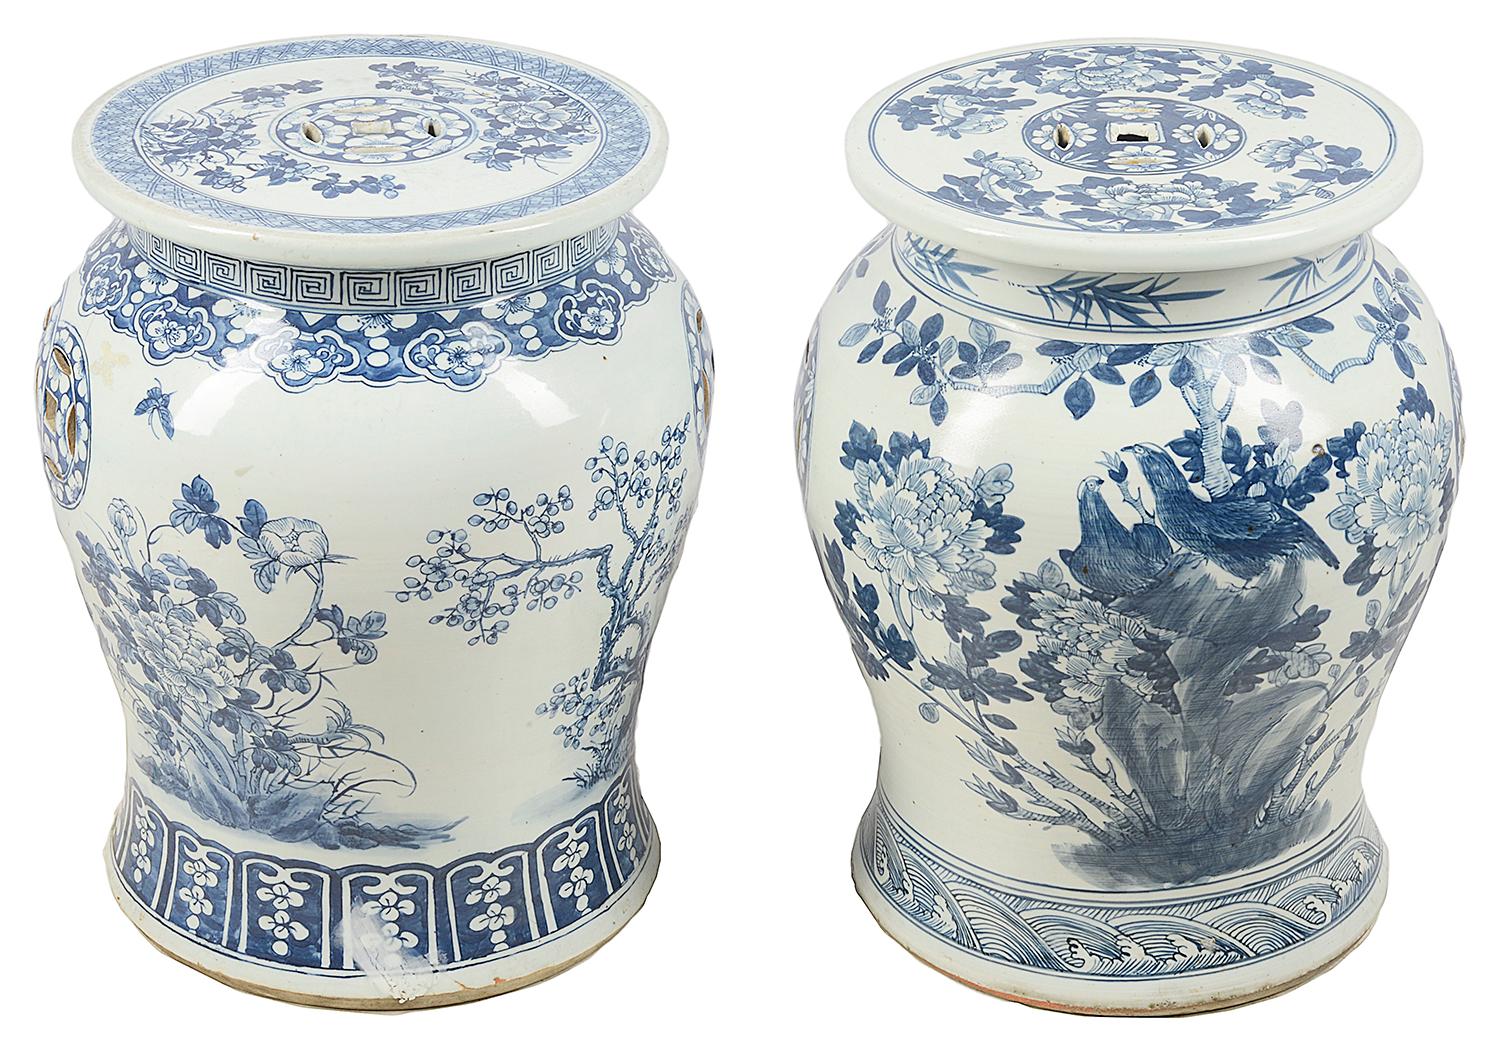 A good quality near pair of early 20th century Chinese blue and white garden seats, each with a bulbous form, hand painted flowers, foliage and birds.